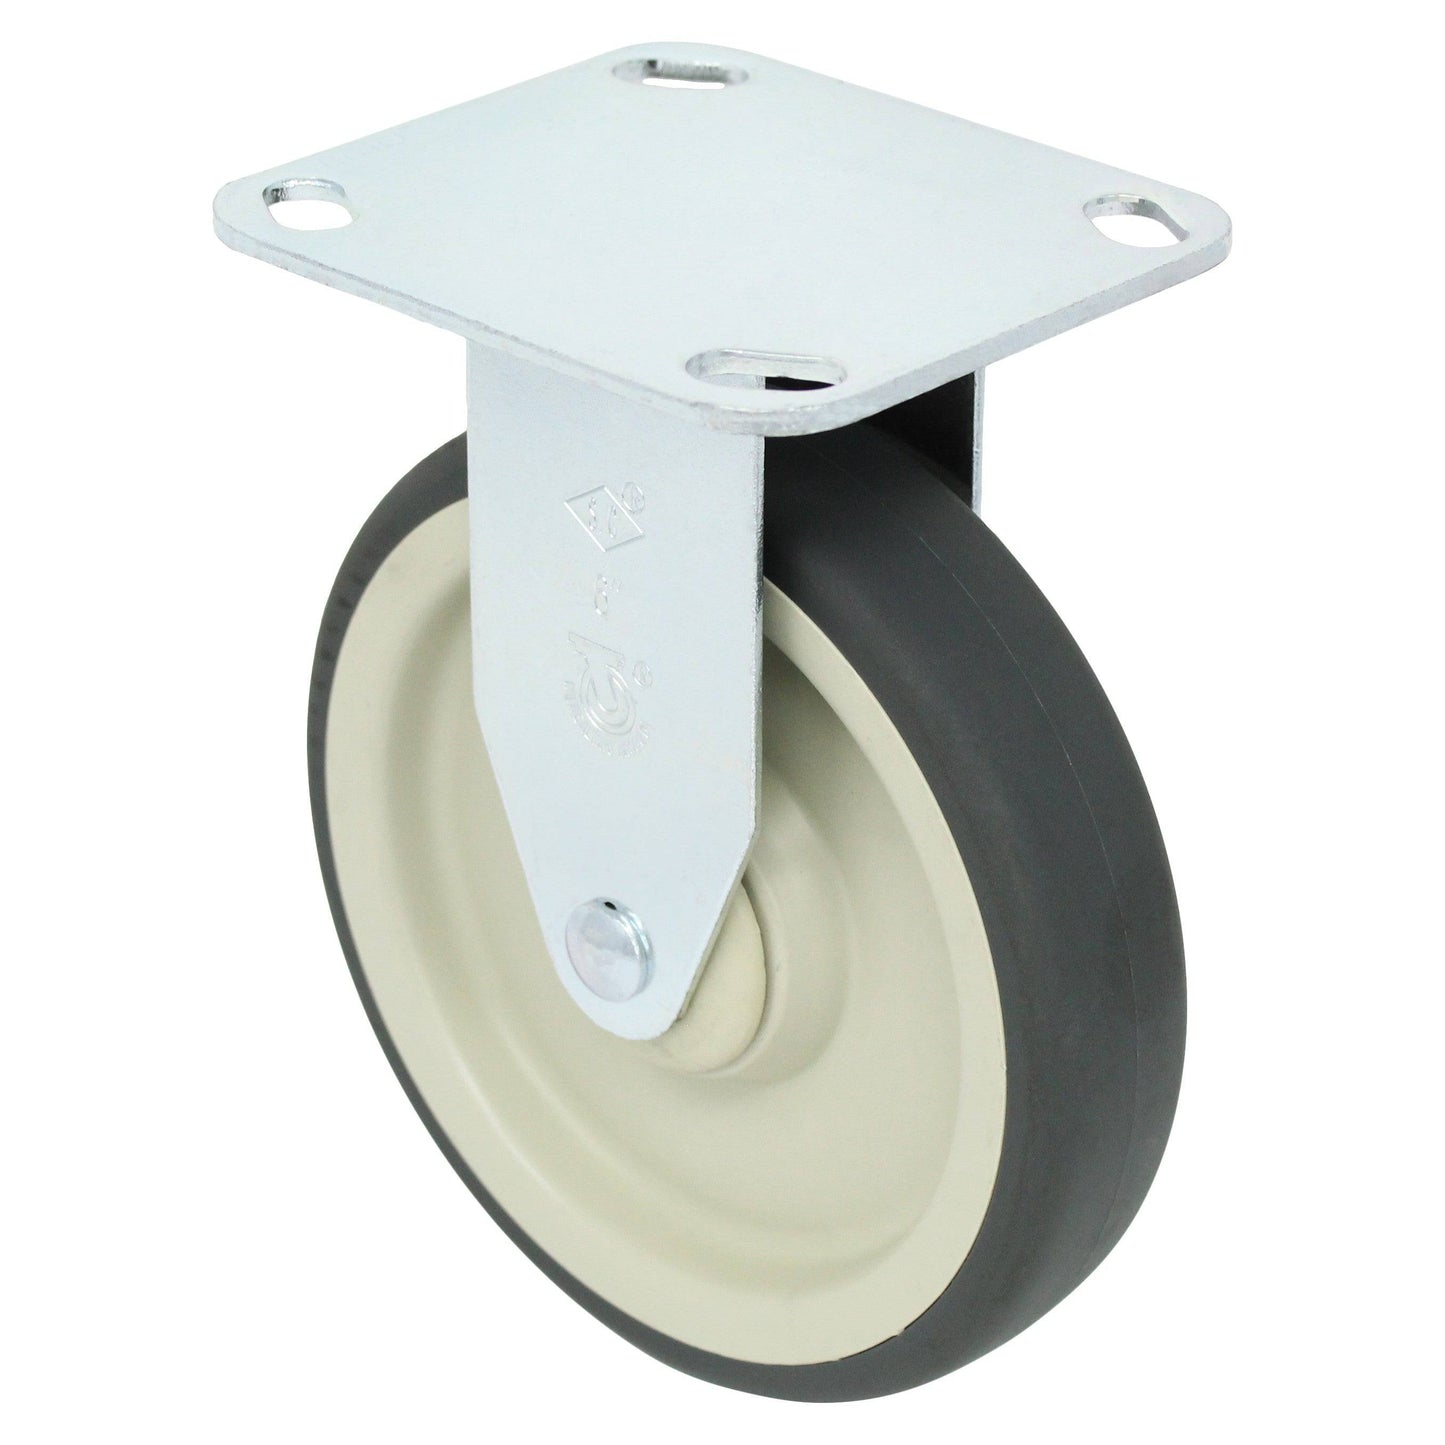 6" x 1-1/4" Poly-Pro Wheel Rigid Caster 4" x 4-1/2" Top Plate - 350 lbs. capacity - Durable Superior Casters